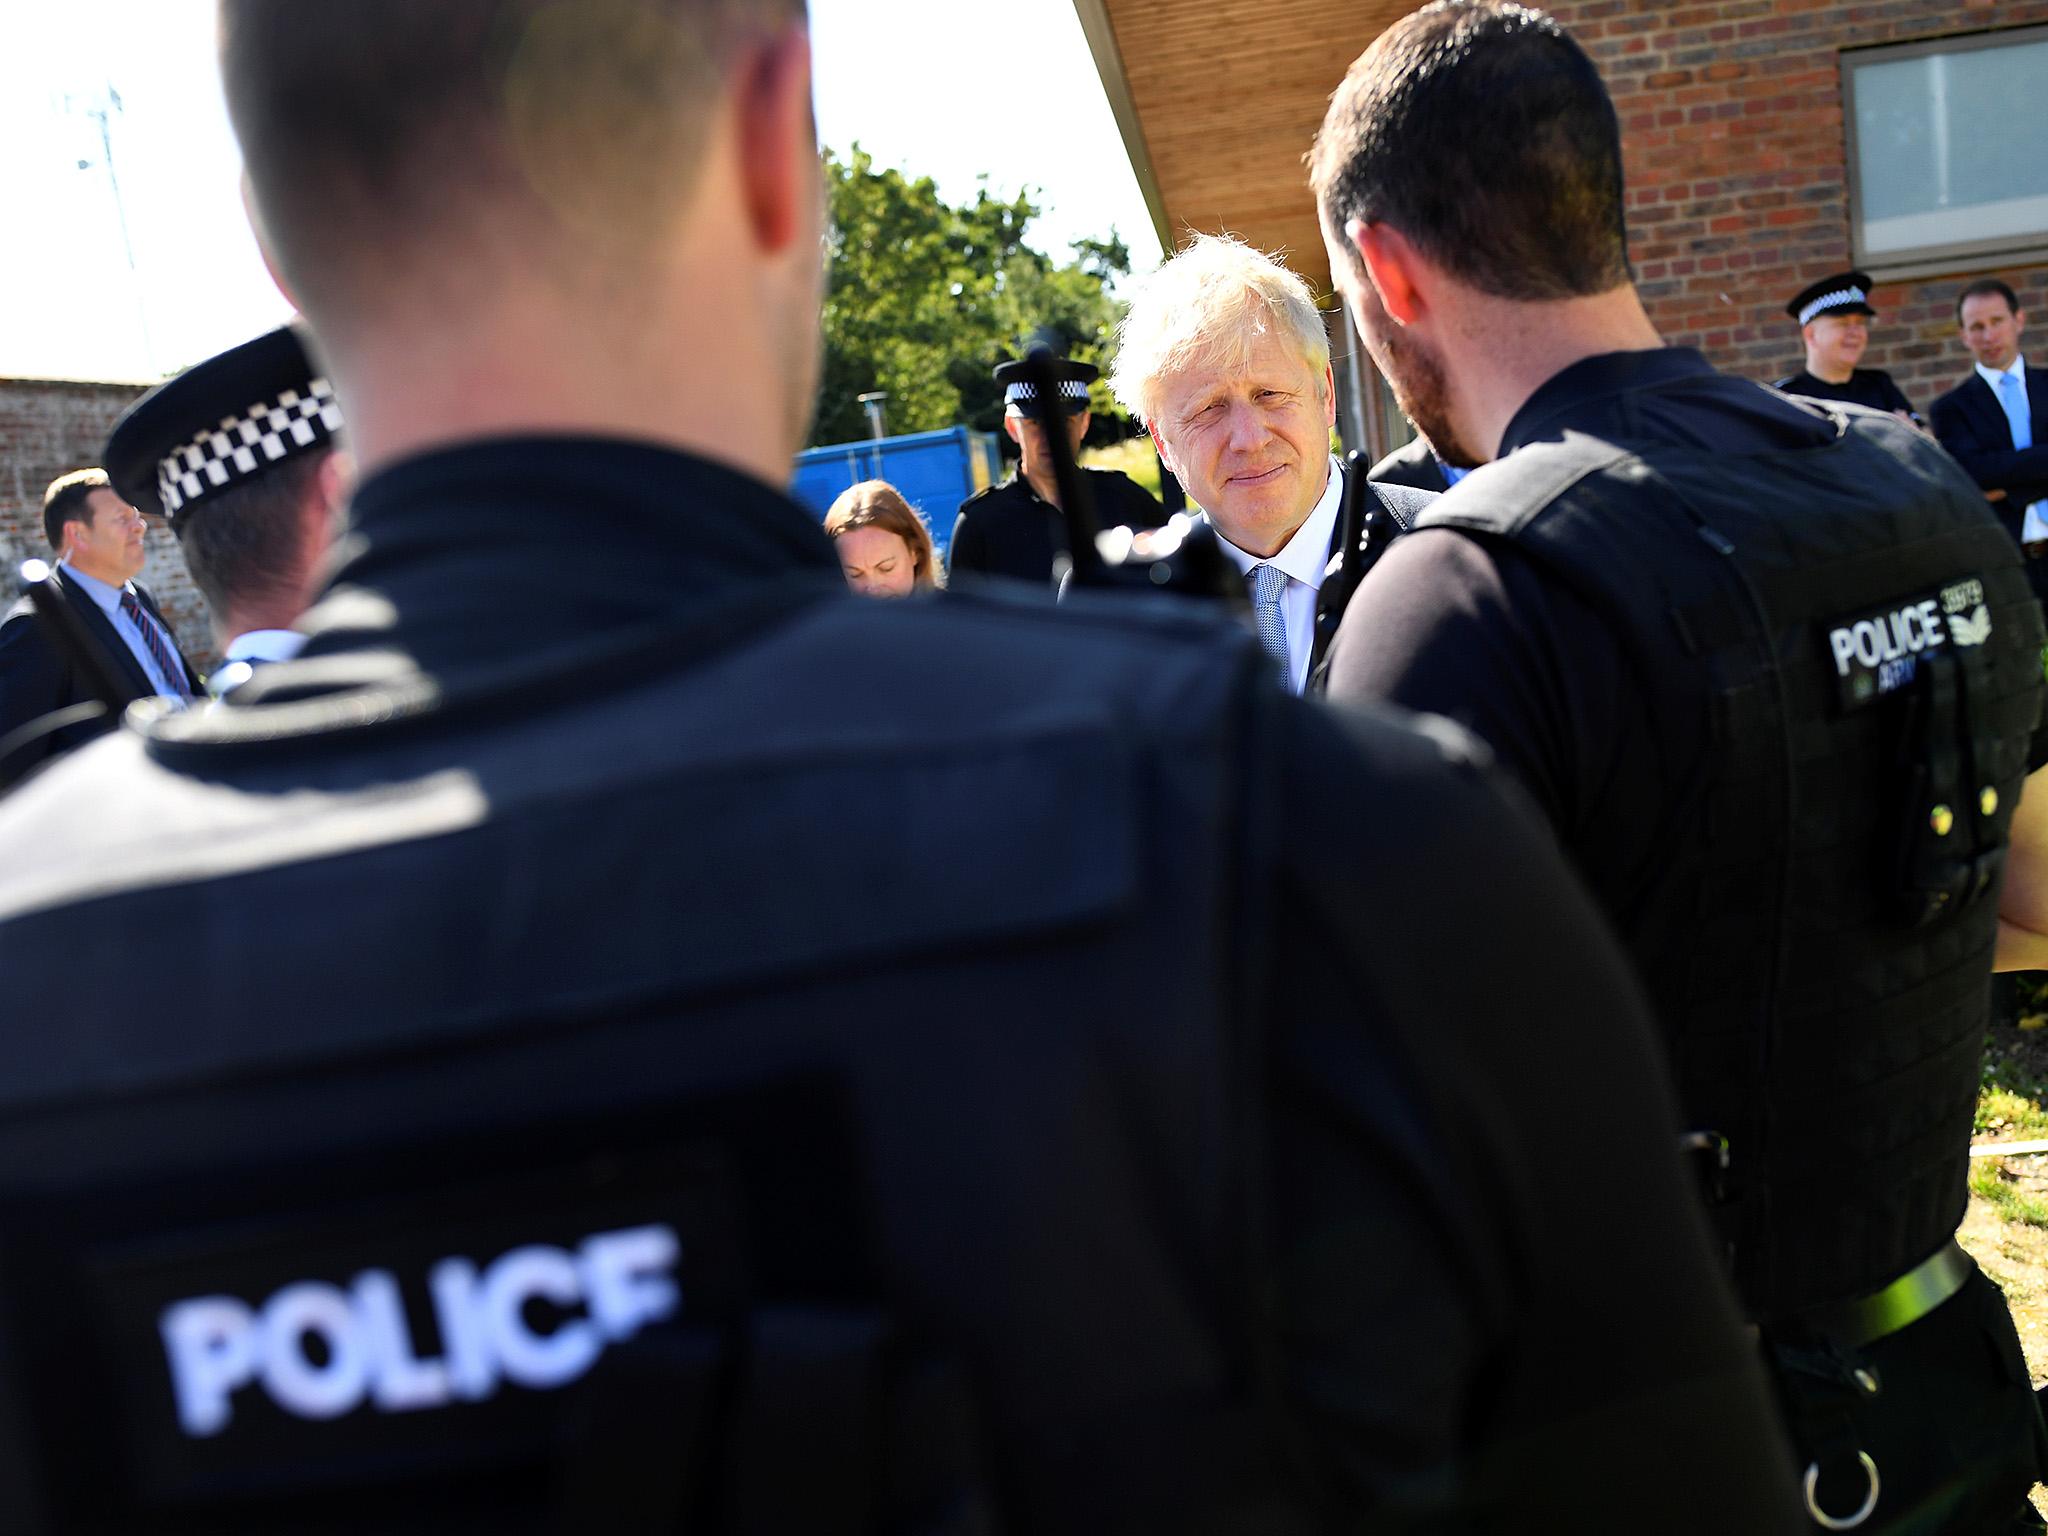 Johnson visits the Thames Valley Police Training Centre in Reading (PA)